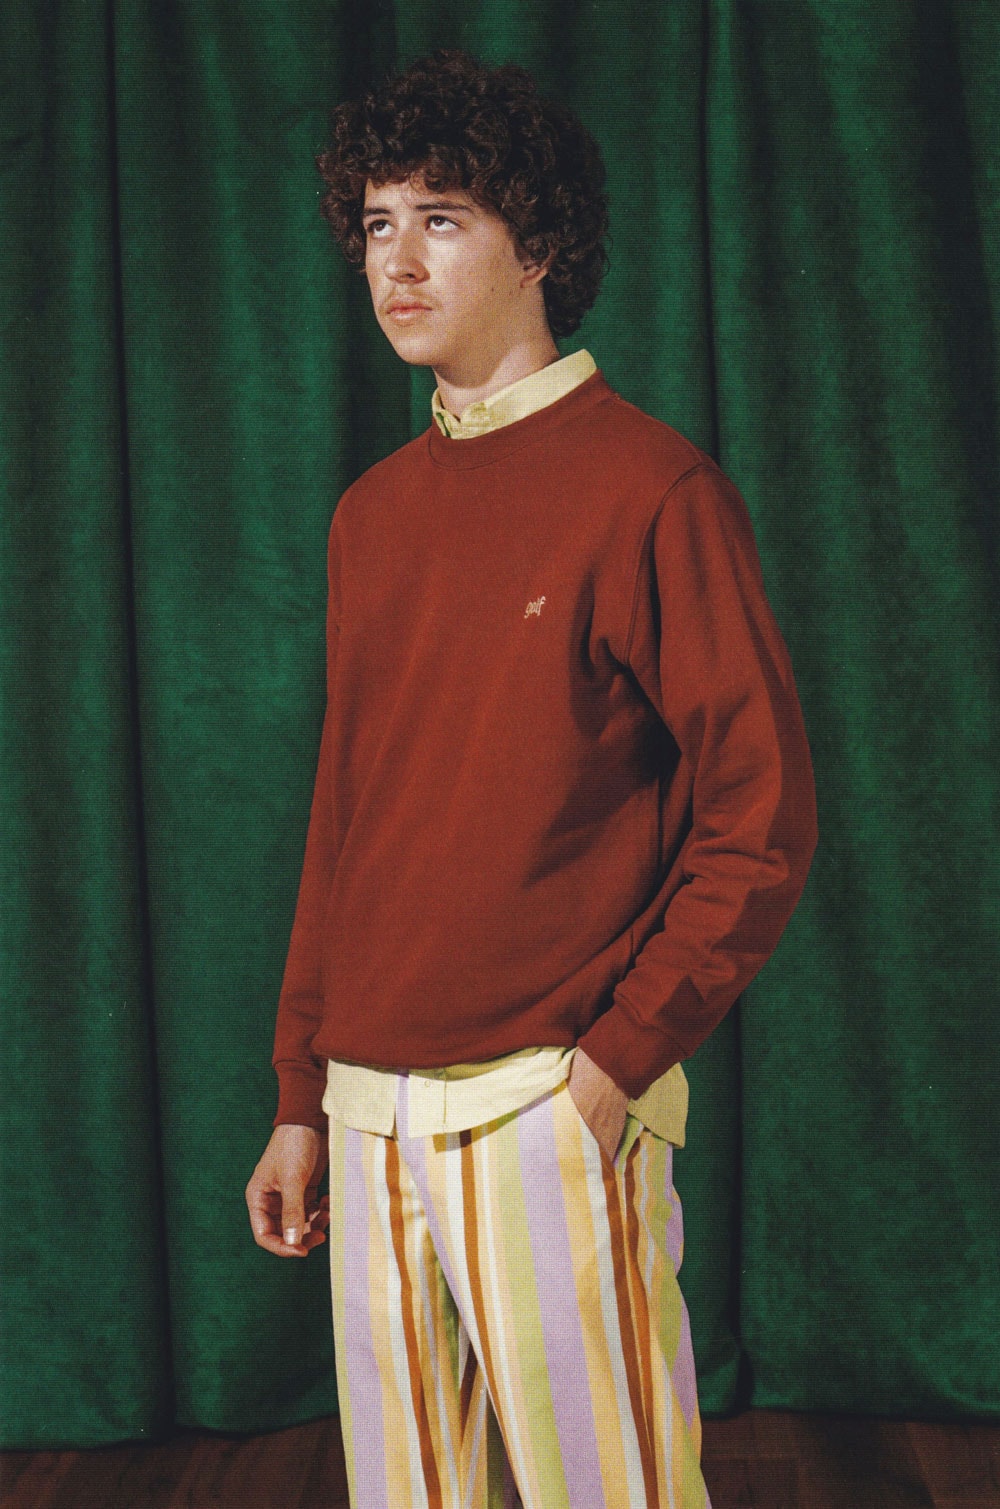 golf wang fall 2018 lookbook collection red pullover jumper sweater vertical stripe pants shirt yellow pink orange chest embroidery branding logo one point